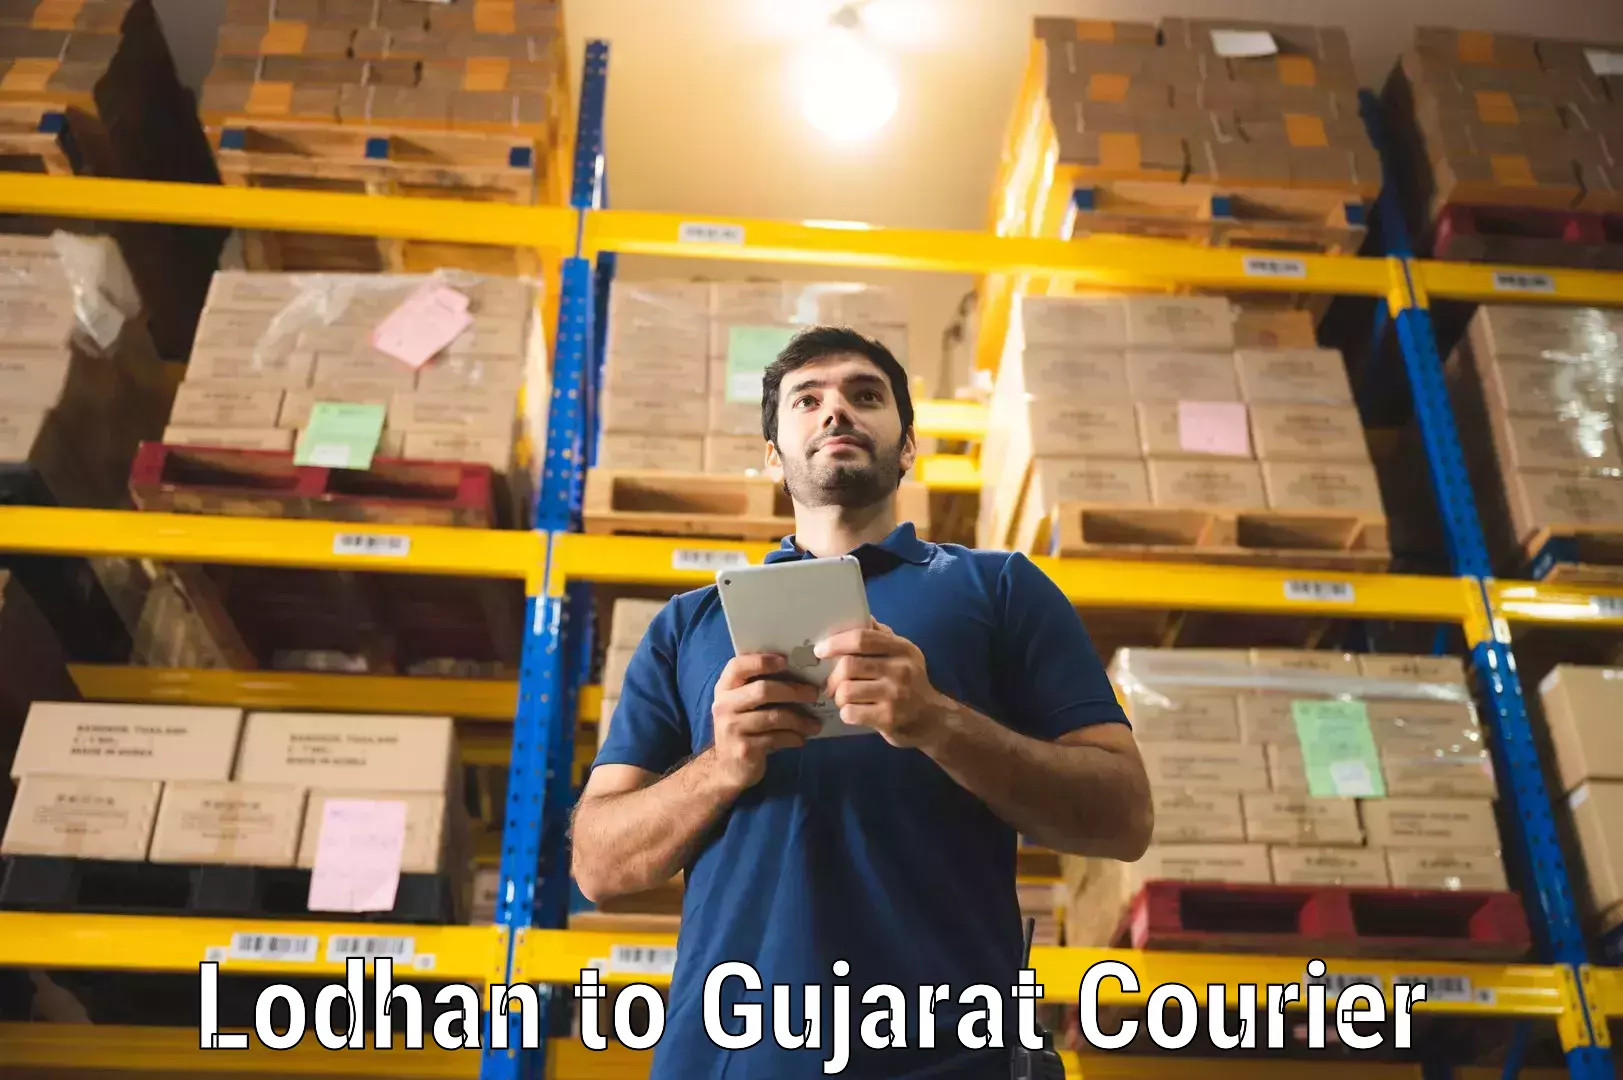 Automated parcel services Lodhan to Gujarat